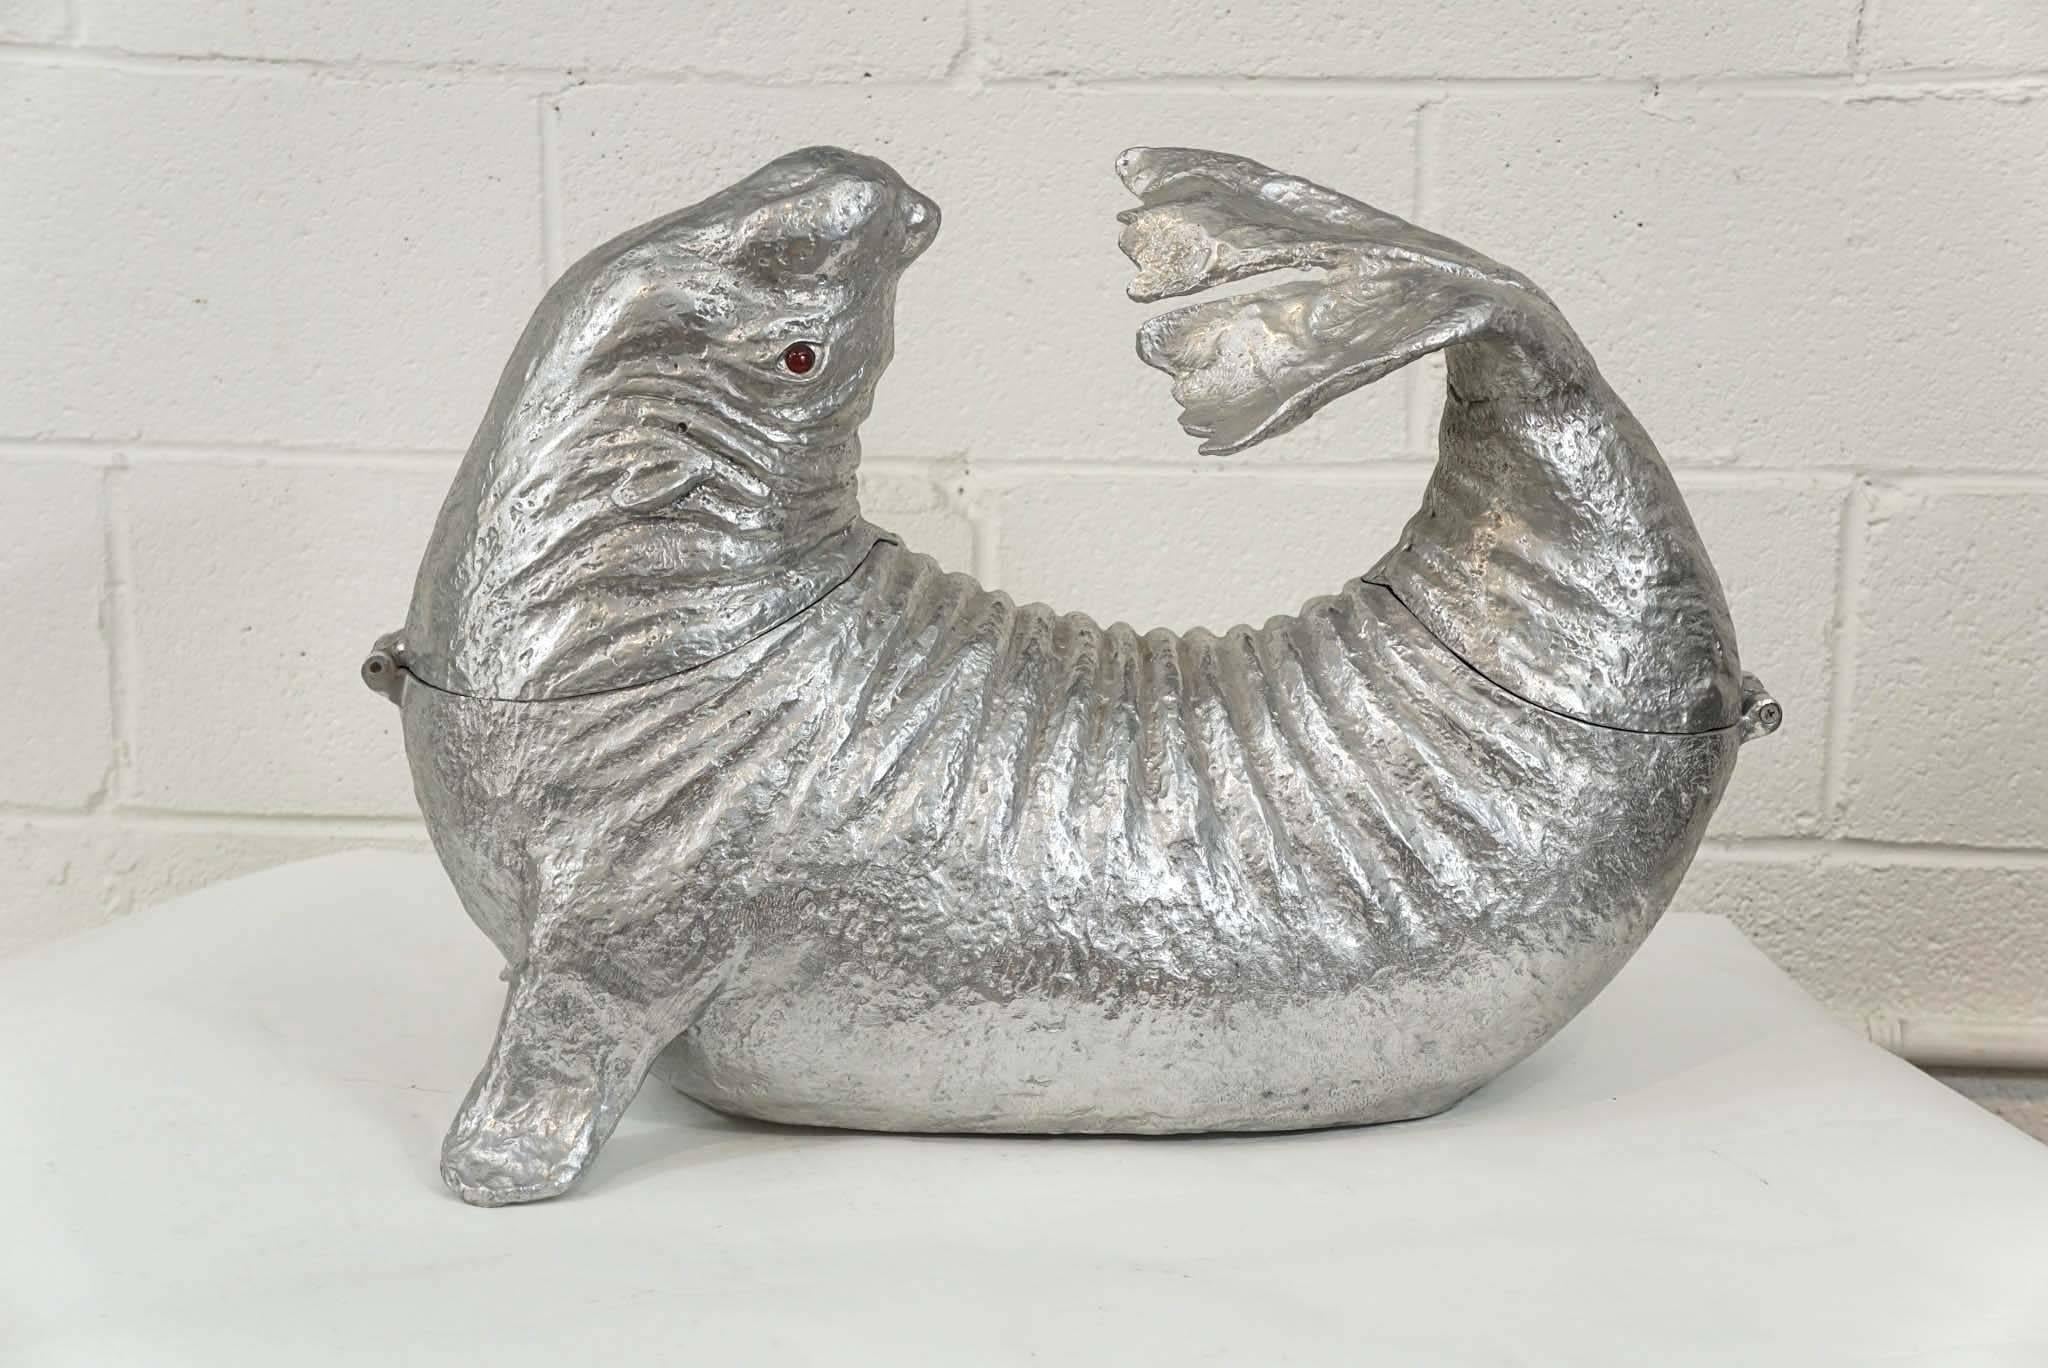 Here is an amazing Arthur Court sea lion ice bucket in cast aluminum.
The head and tail open and the vessel can be filled with ice and a bottle or two of champagne! Great for parties!